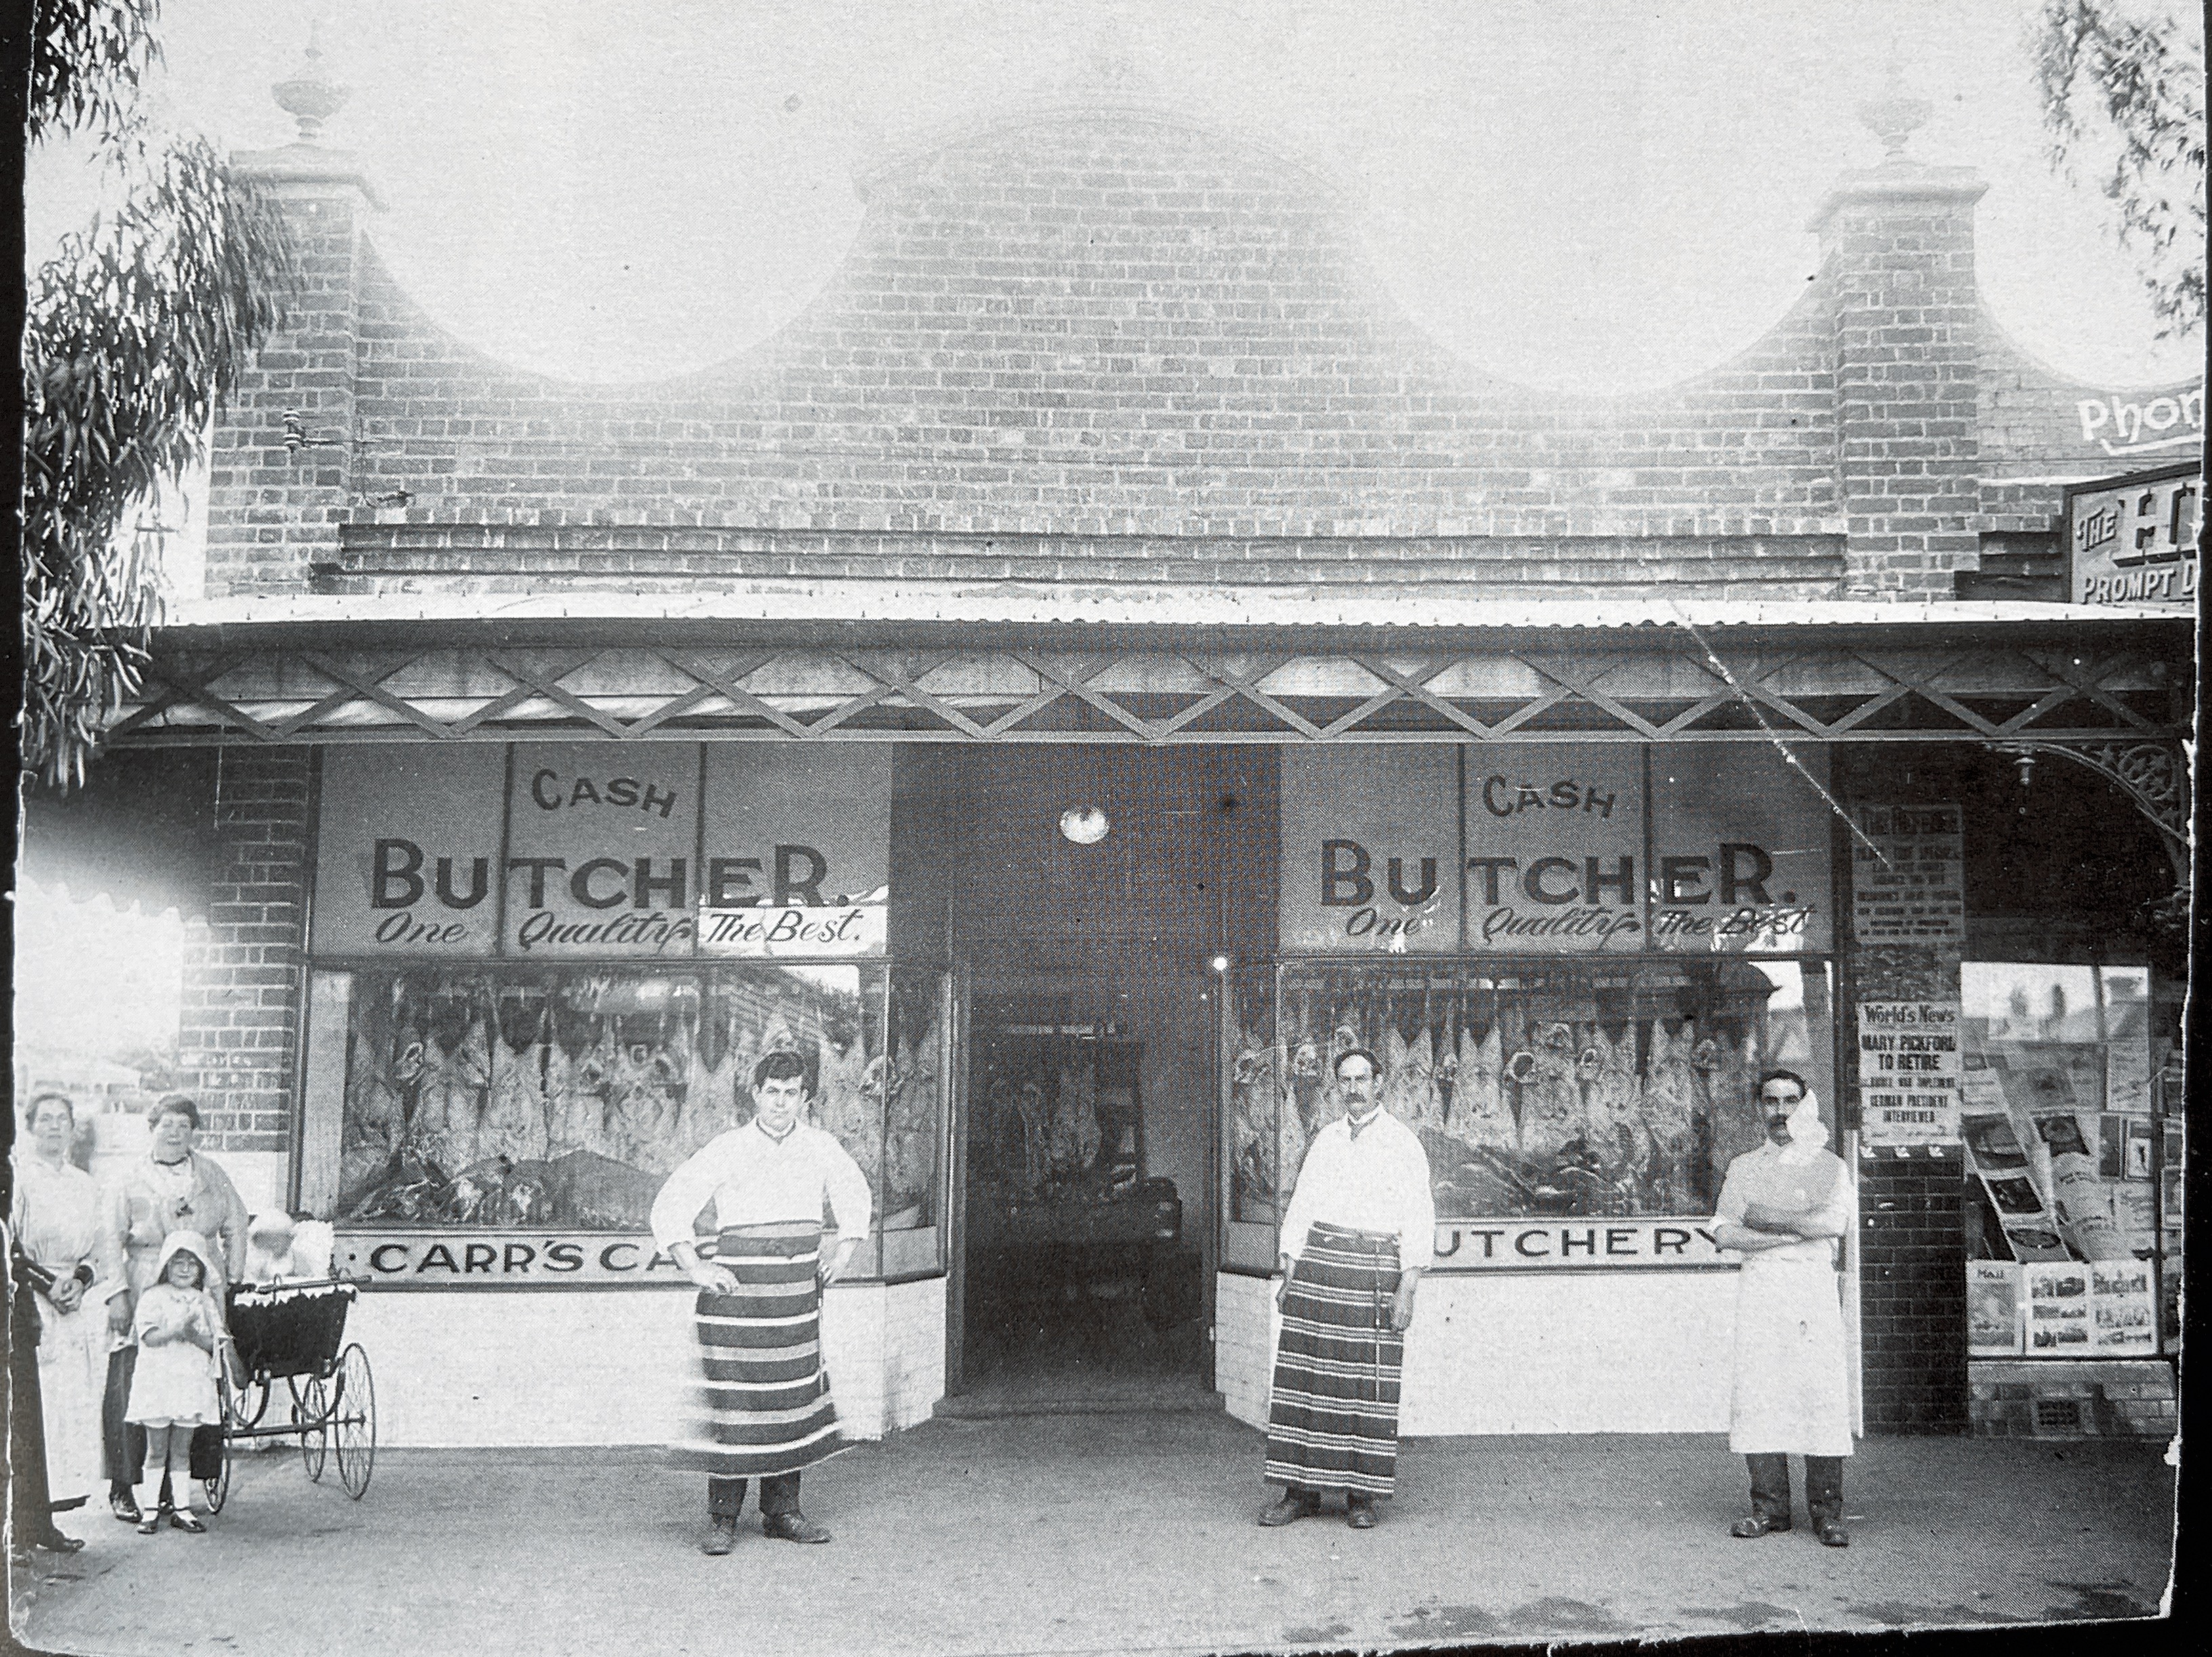 George Cash and Son's Butchers Shop was located Gamon Street Seddon in the 1920's